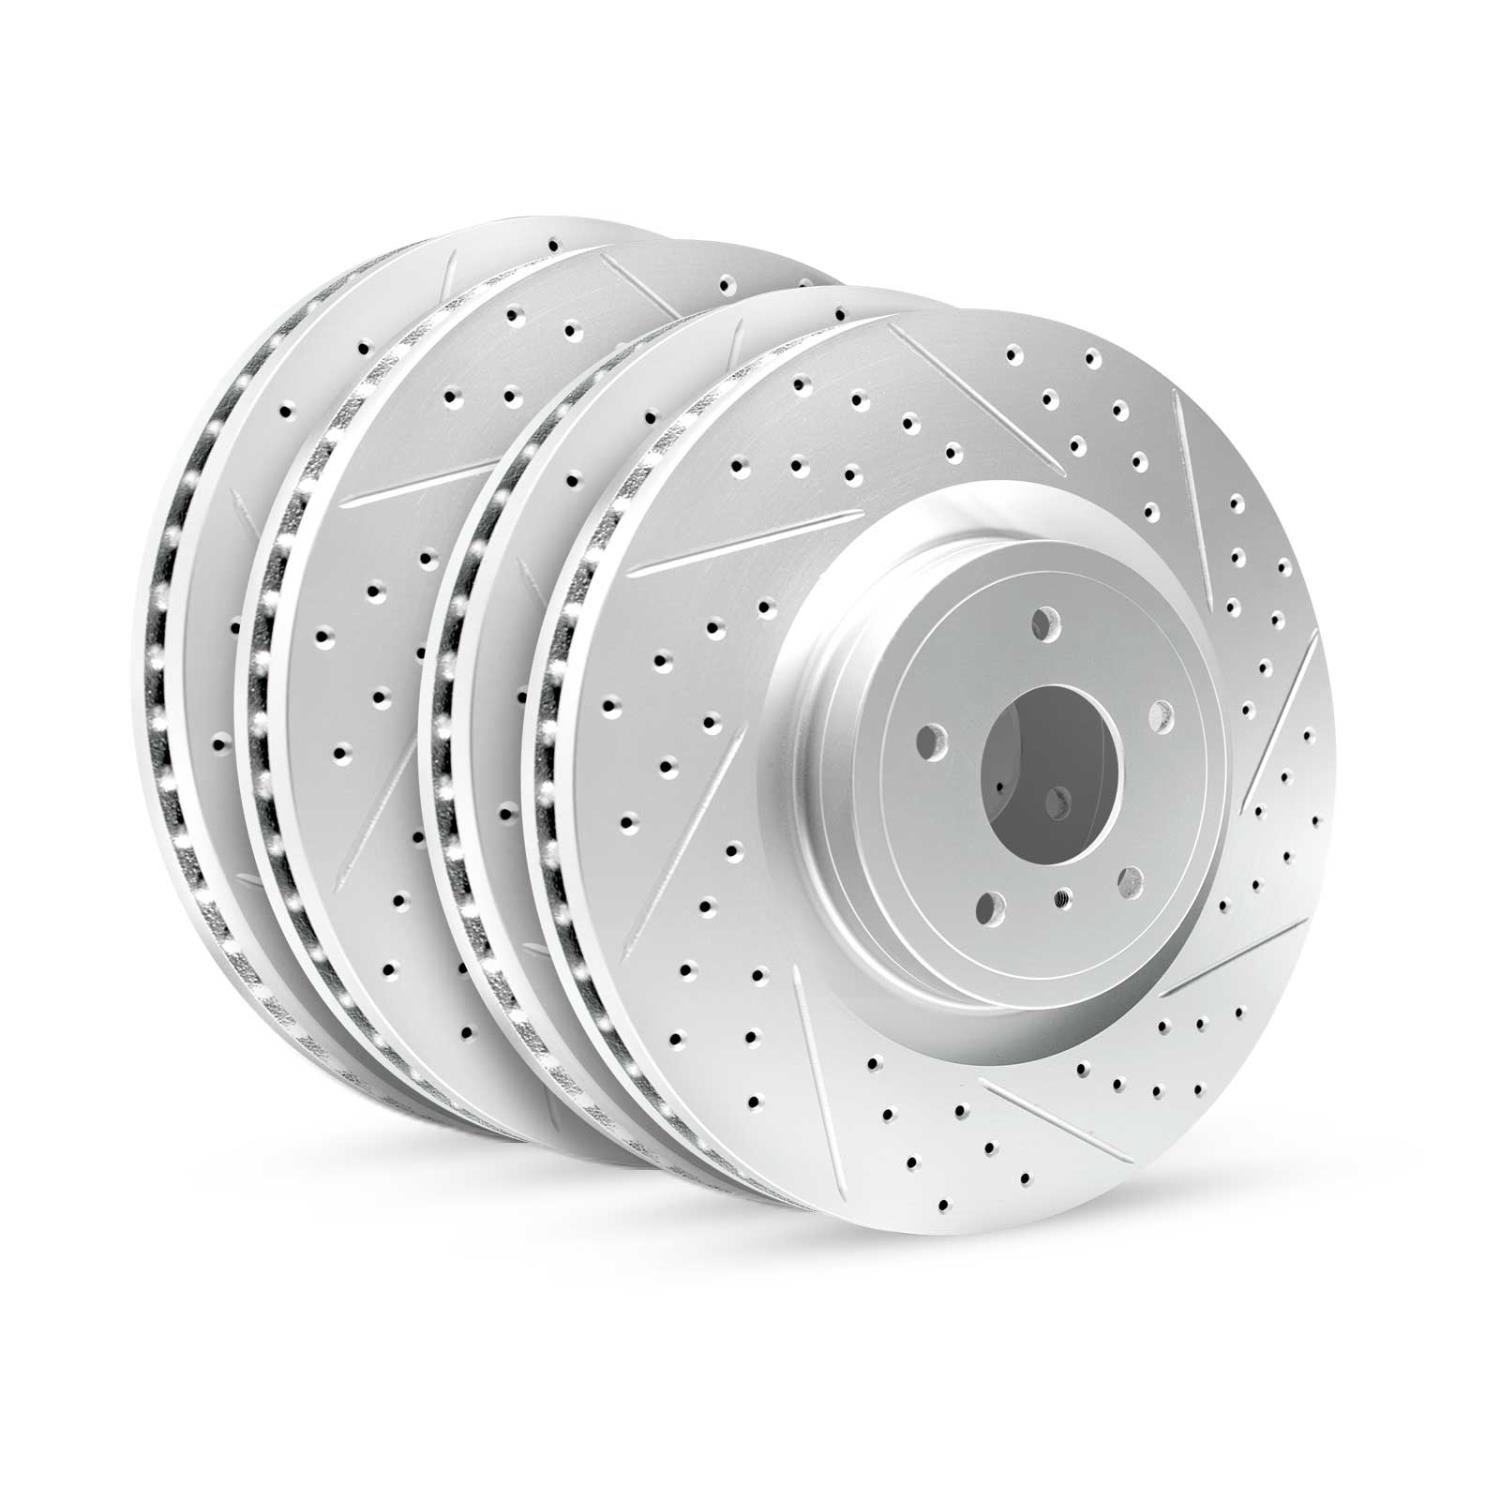 GEO-Carbon Drilled/Slotted Rotors, 2001-2005 Kia/Hyundai/Genesis, Position: Front/Rear